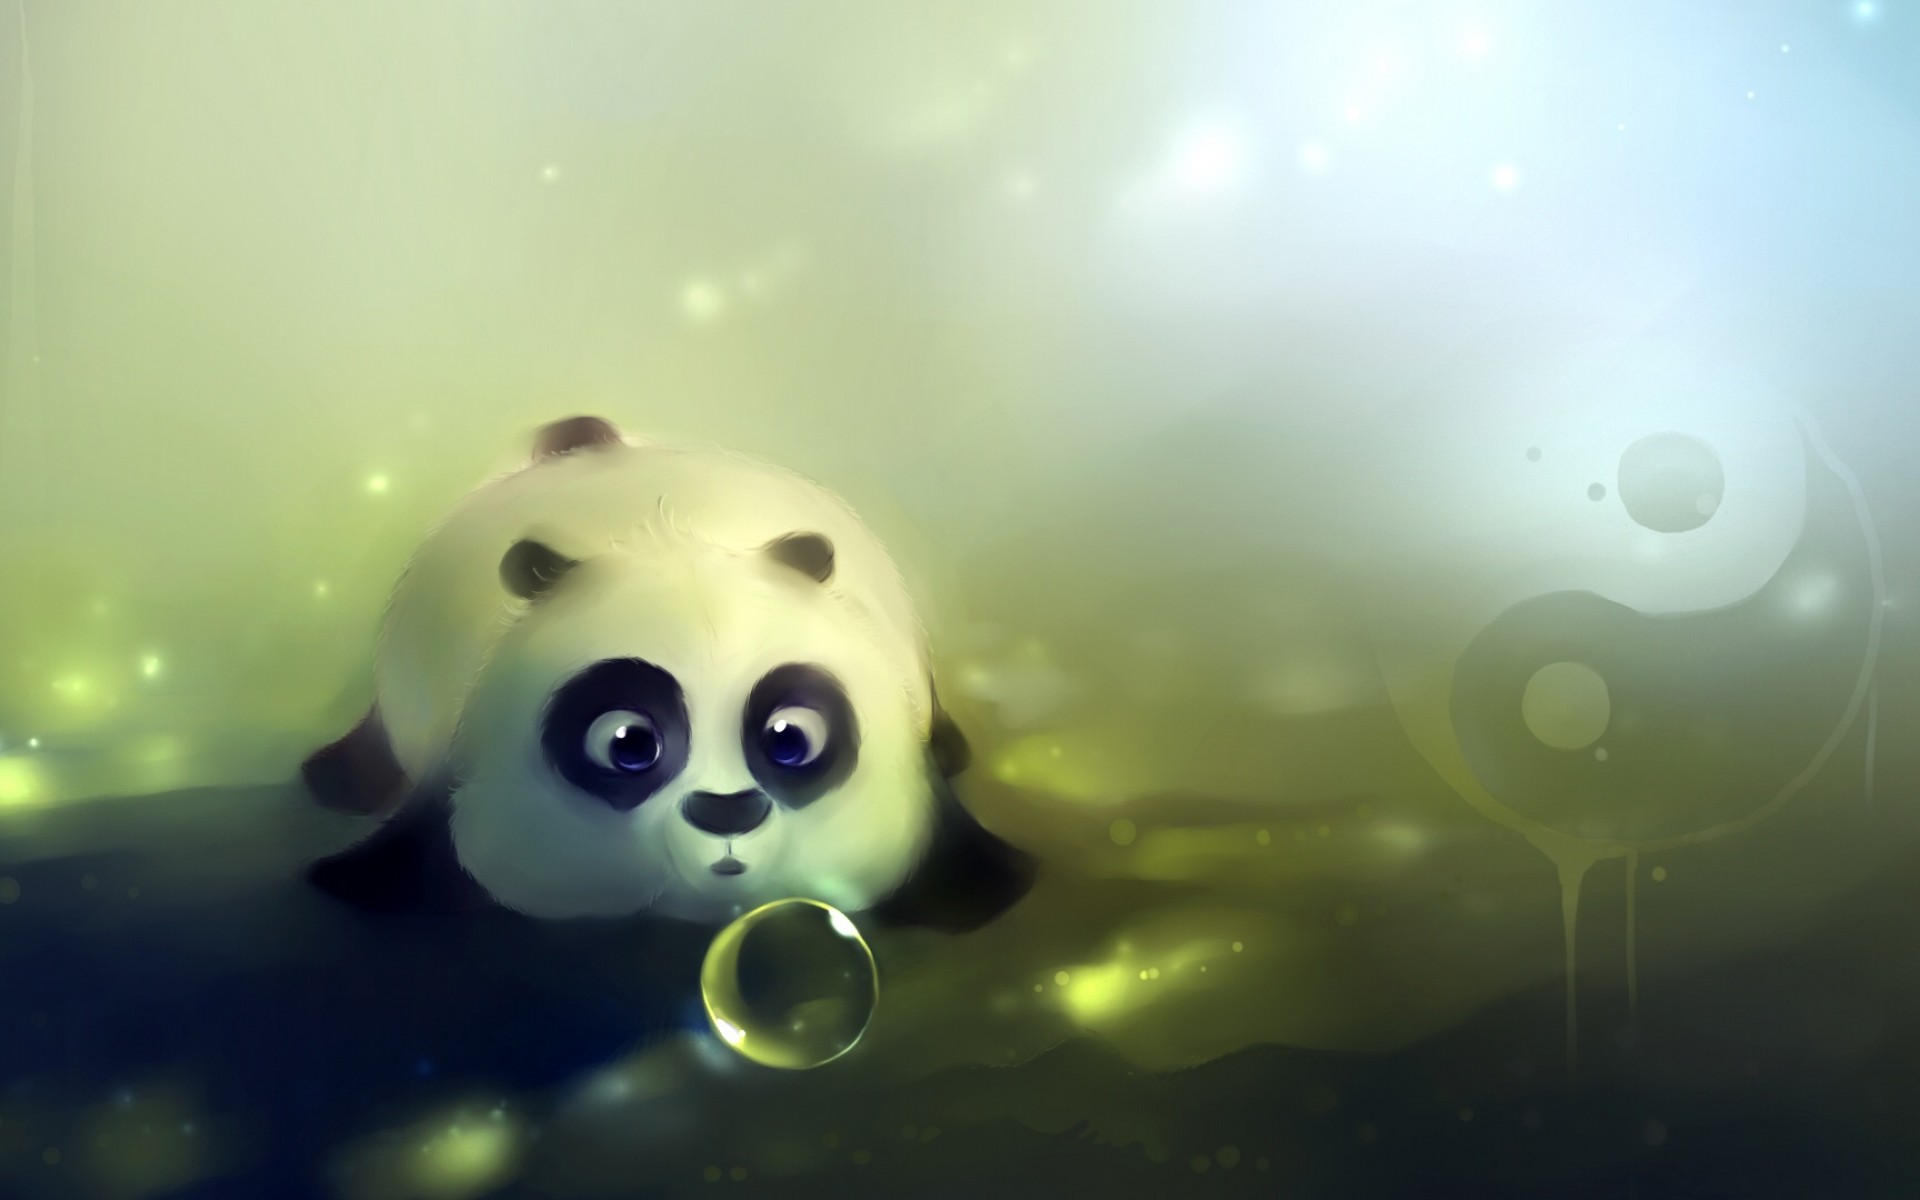 Collection of Cute Backgrounds For Desktop on HDWallpapers